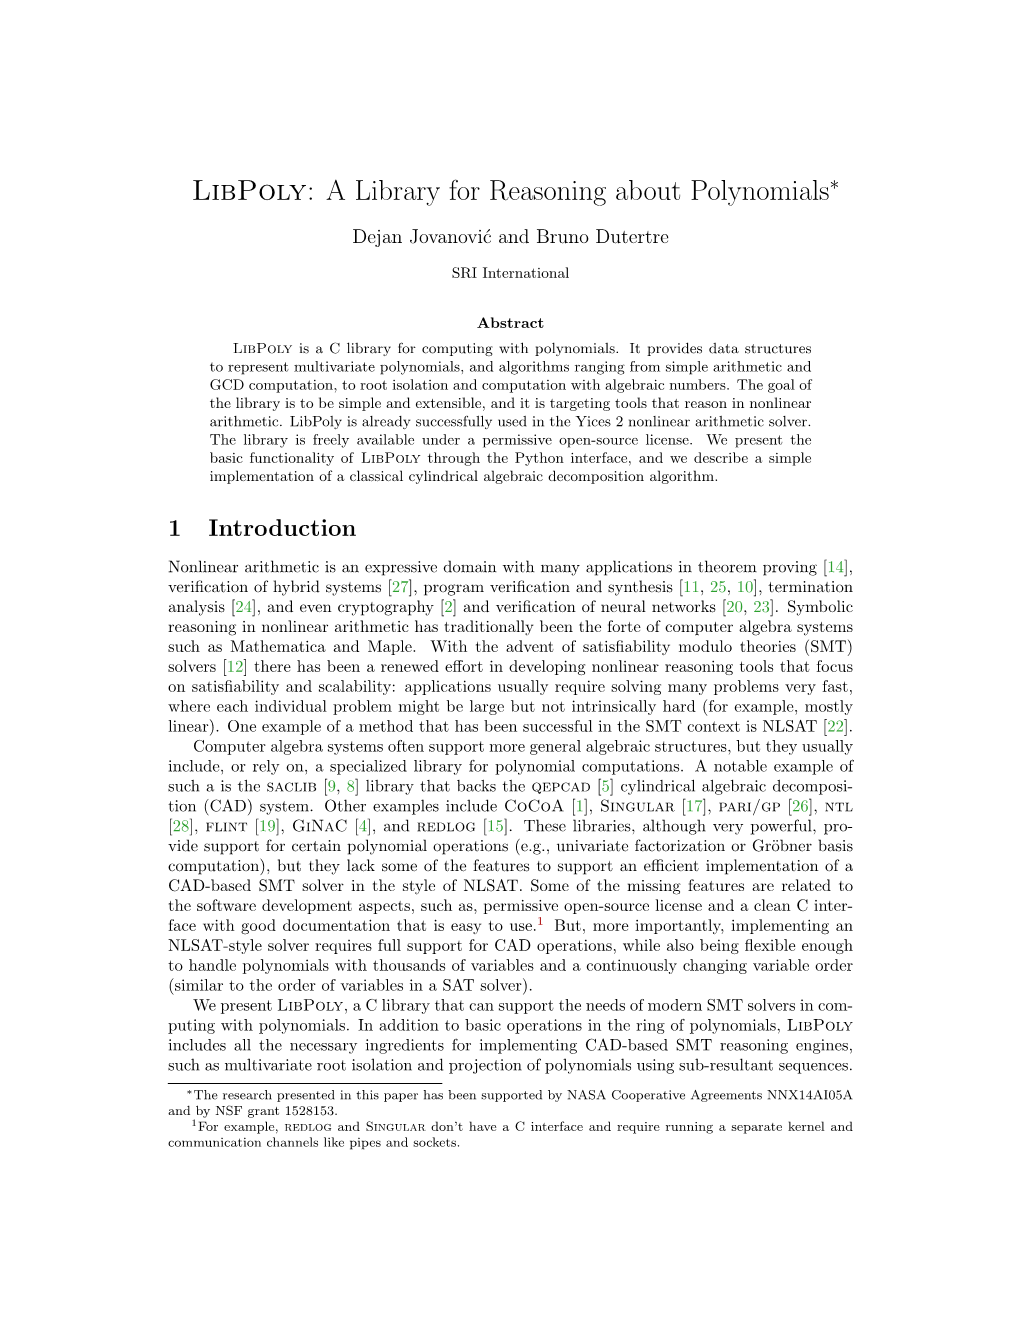 Libpoly: a Library for Reasoning About Polynomials∗